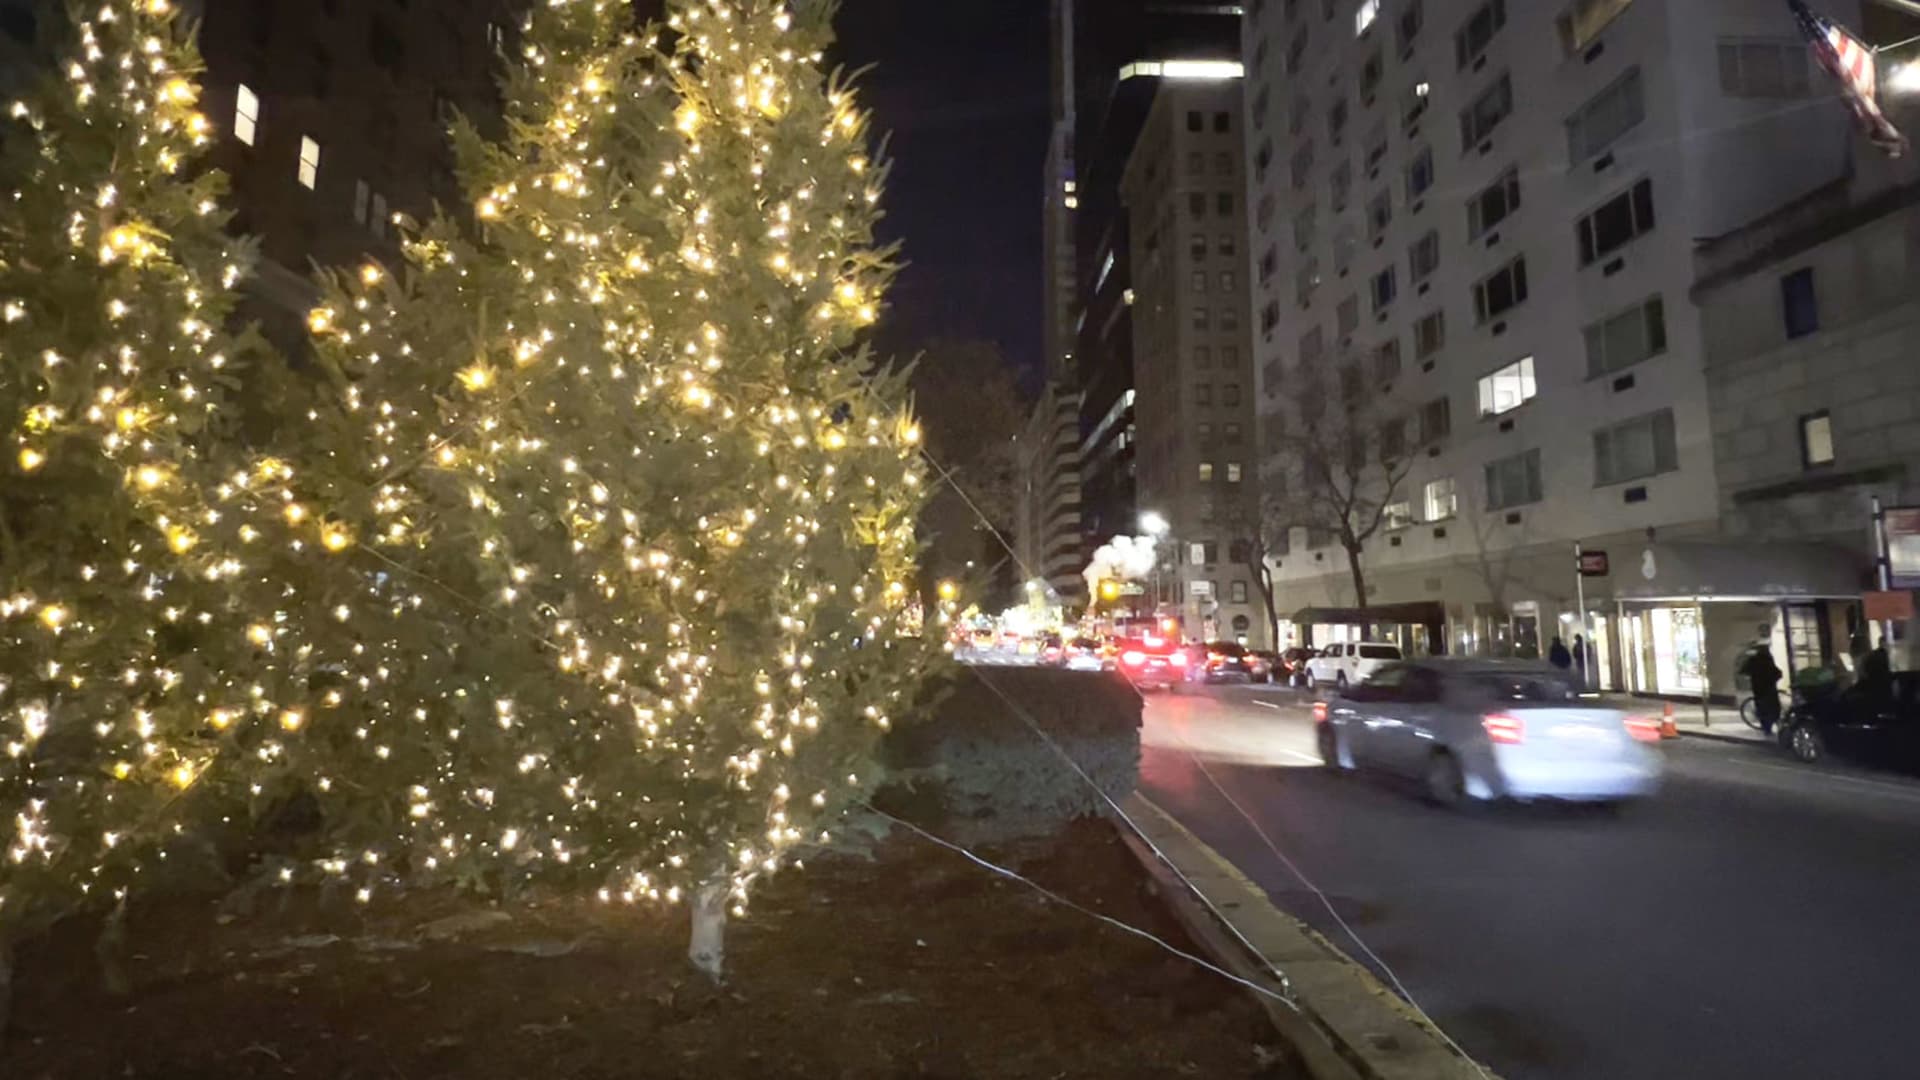 For this company, decorating Park Avenue for Christmas is a family tradition